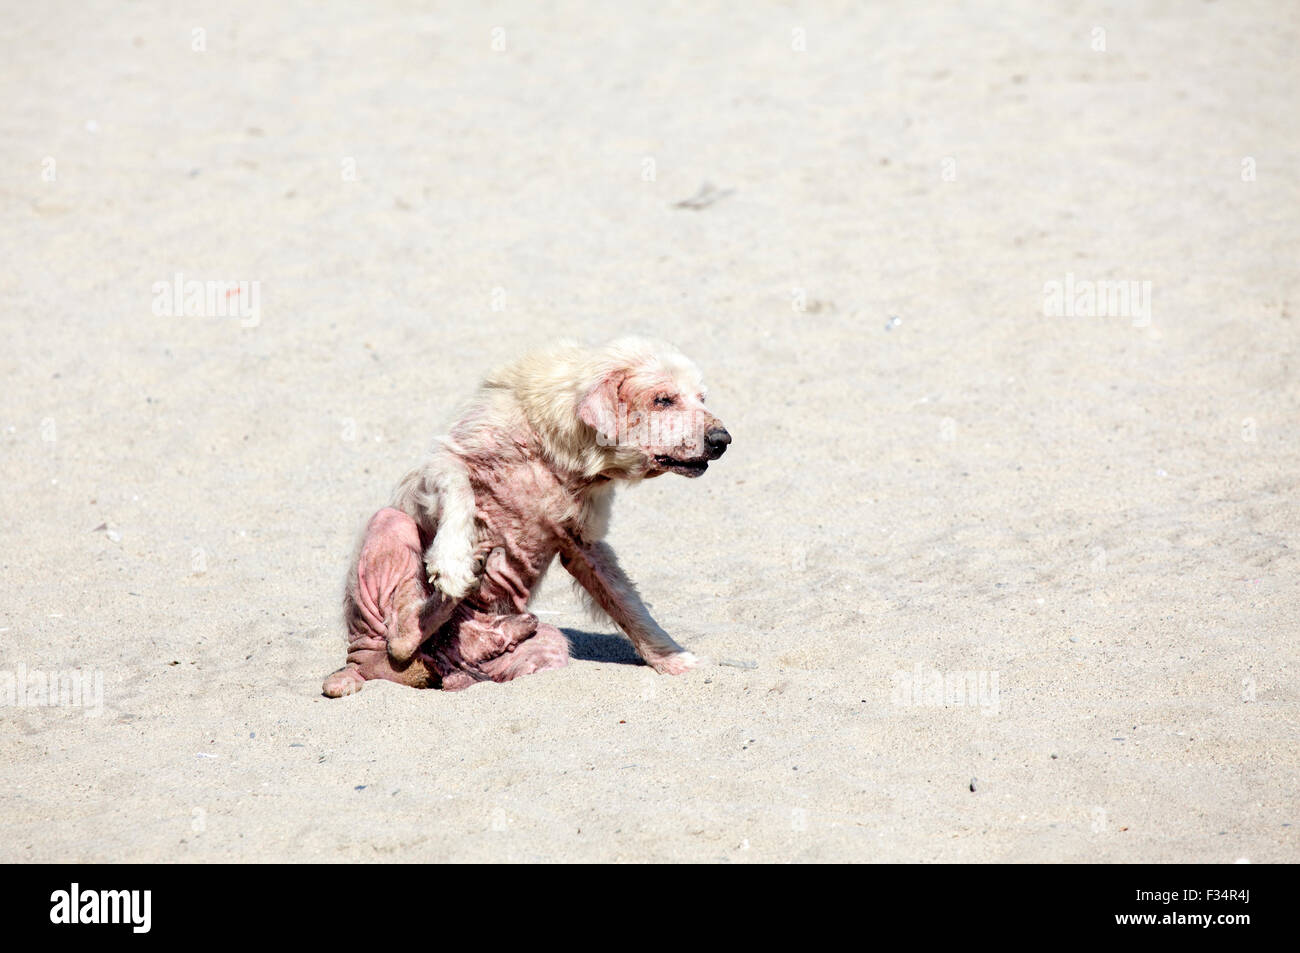 A dog scratching himself because he has a severe case of mange disease and sunburn. Stock Photo